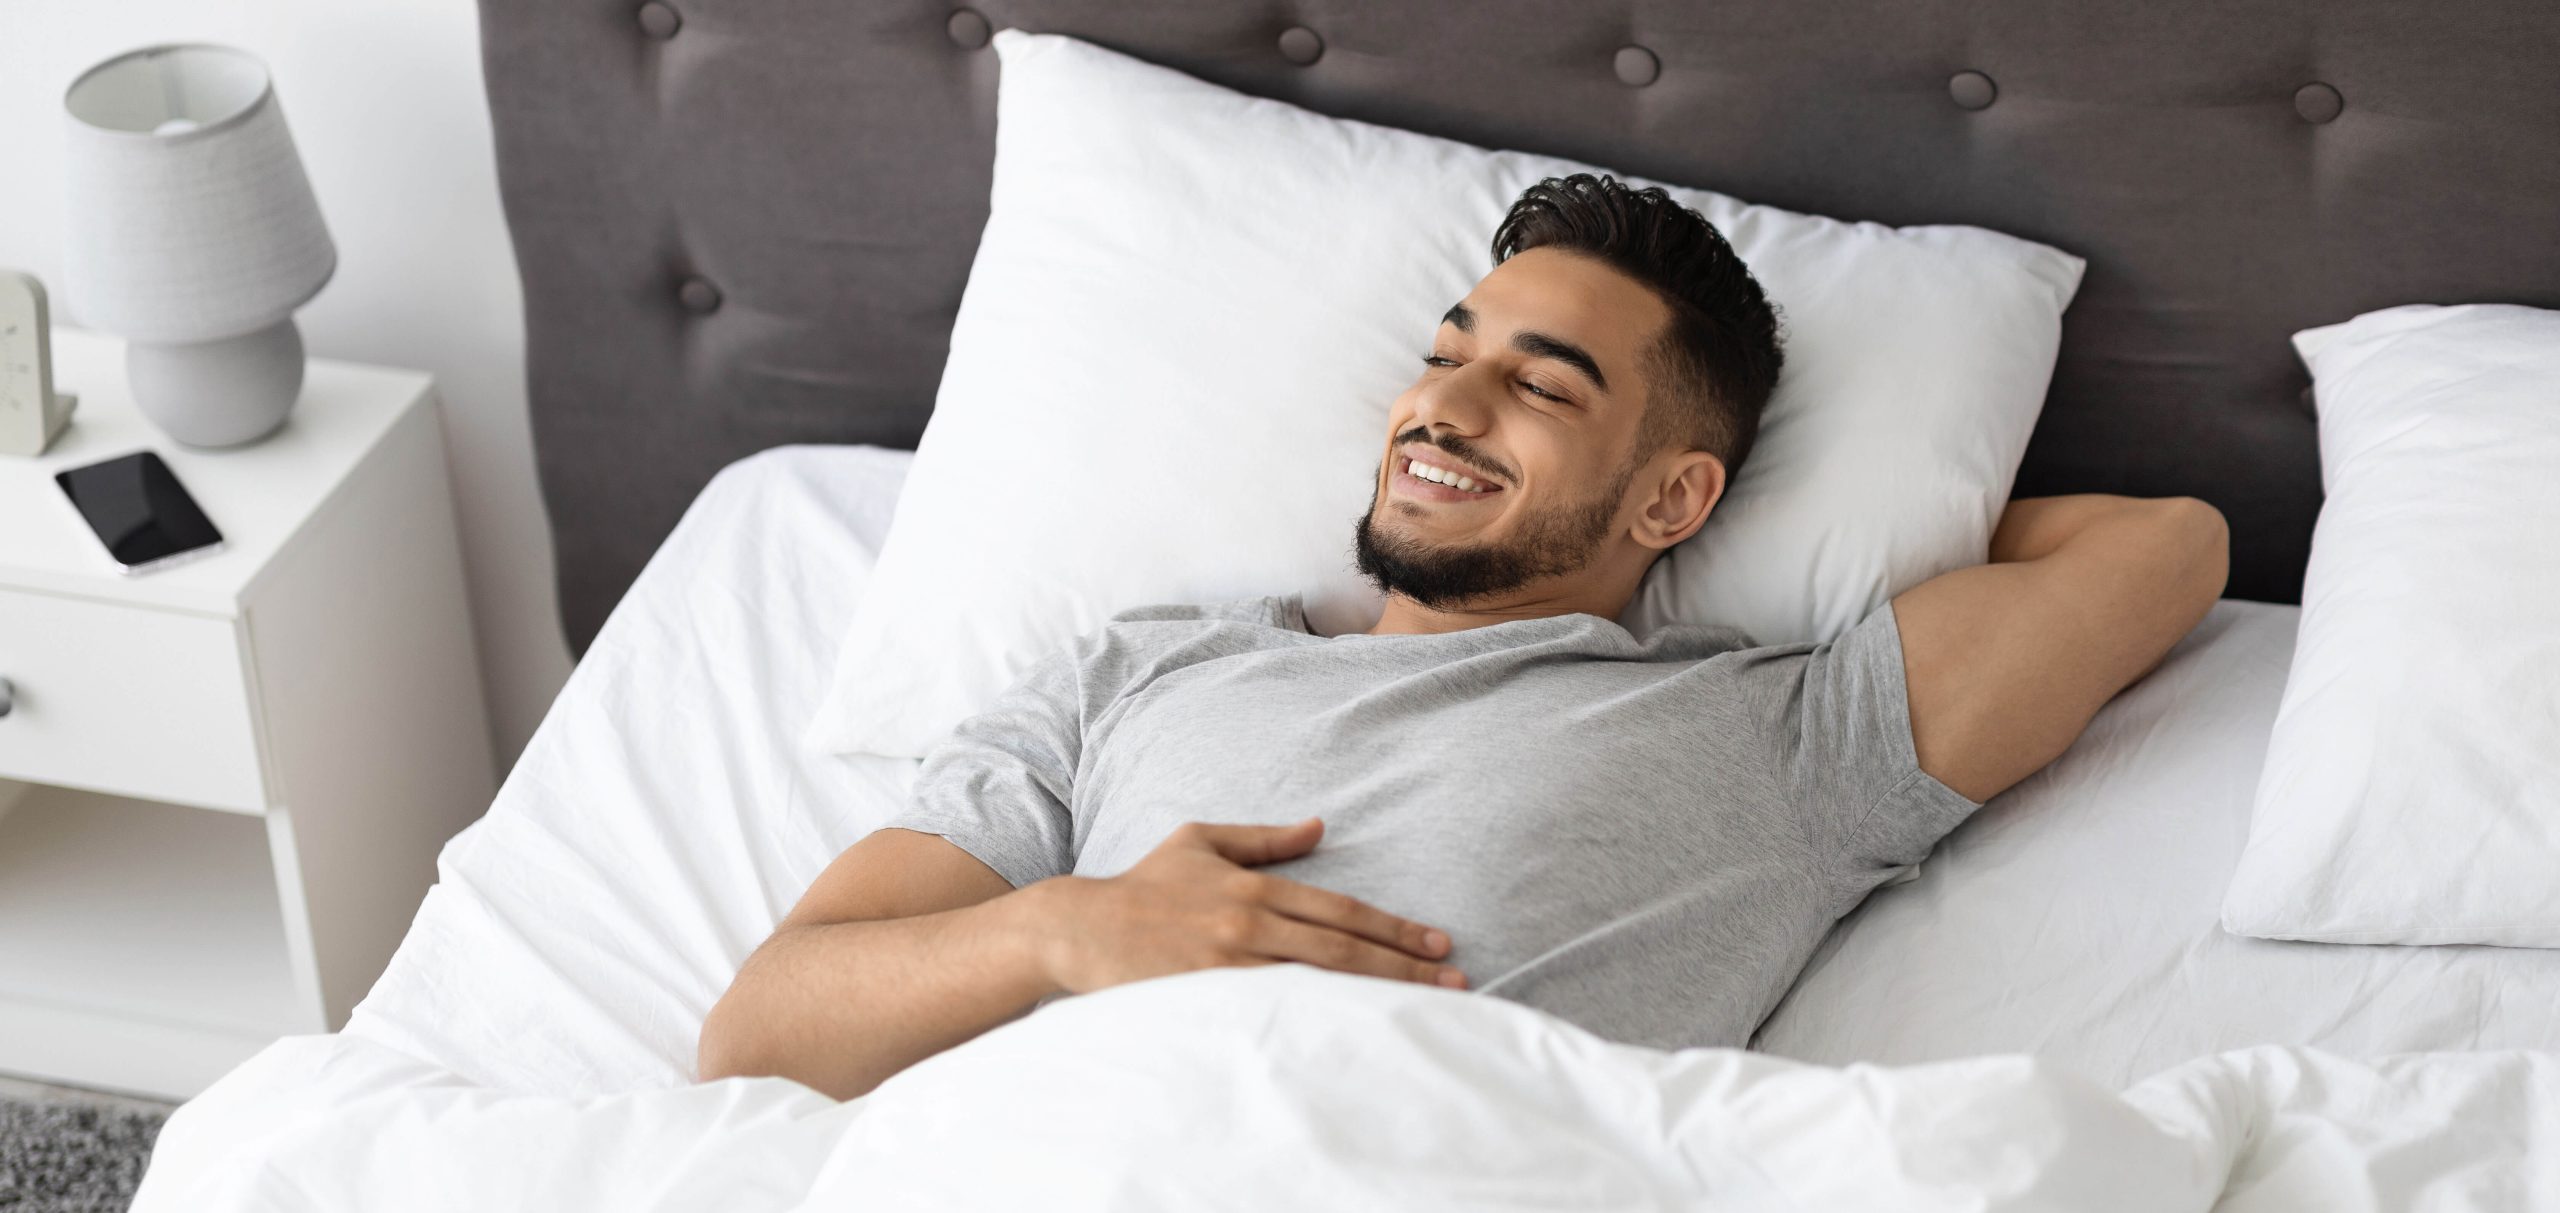 Portrait of happy middle eastern man relaxing in bed